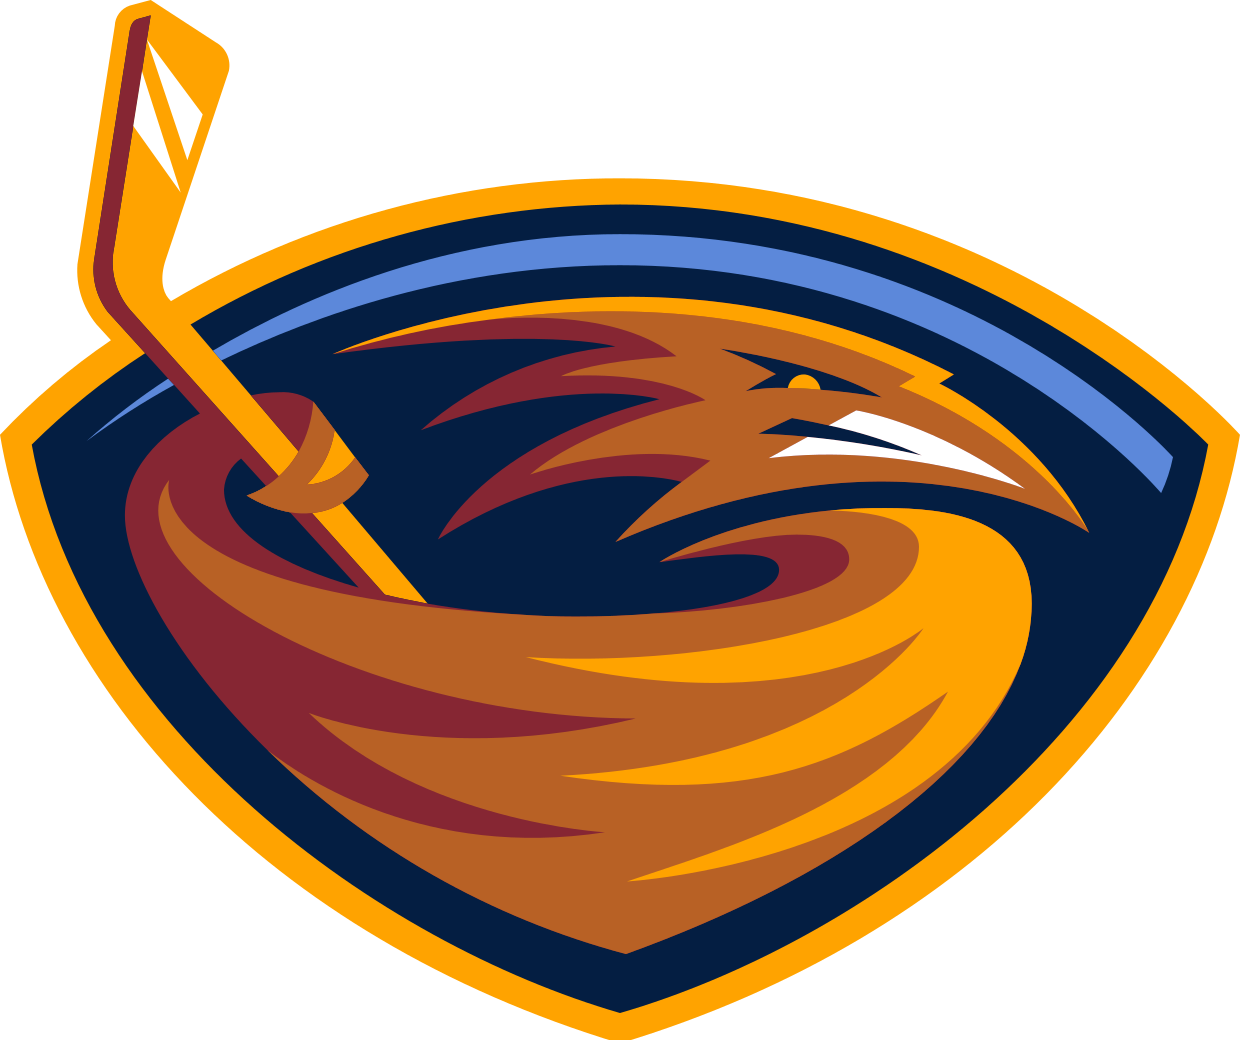 It's A Much More Simpler, Cohesive And Refined Shape - Atlanta Thrashers First Logo (1242x1040)